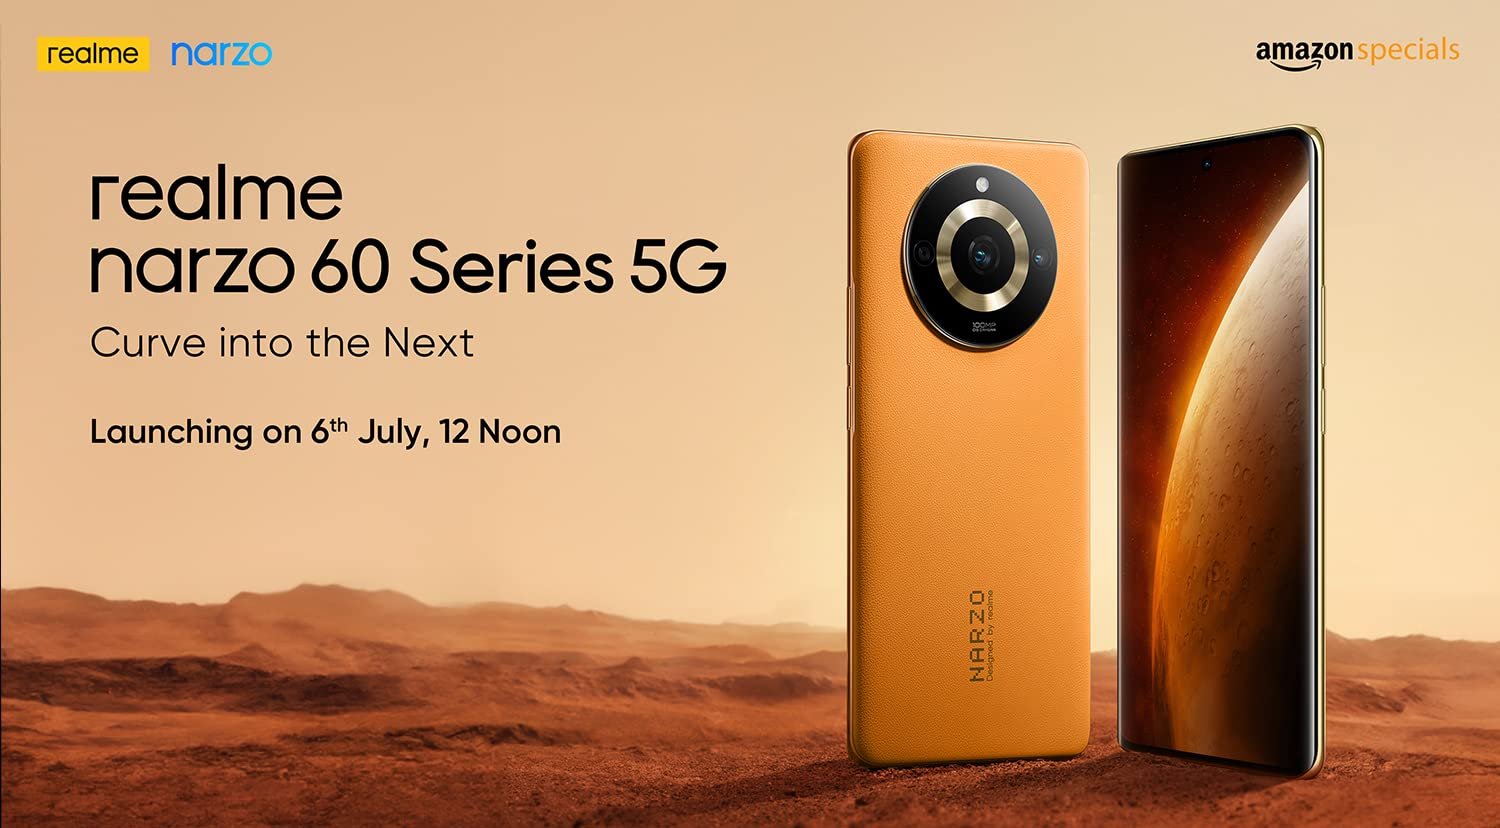 realme announces the pre-booking for realme narzo 60 Series 5G starting 6th July from 1 PM onwards on Amazon.in and realme.com